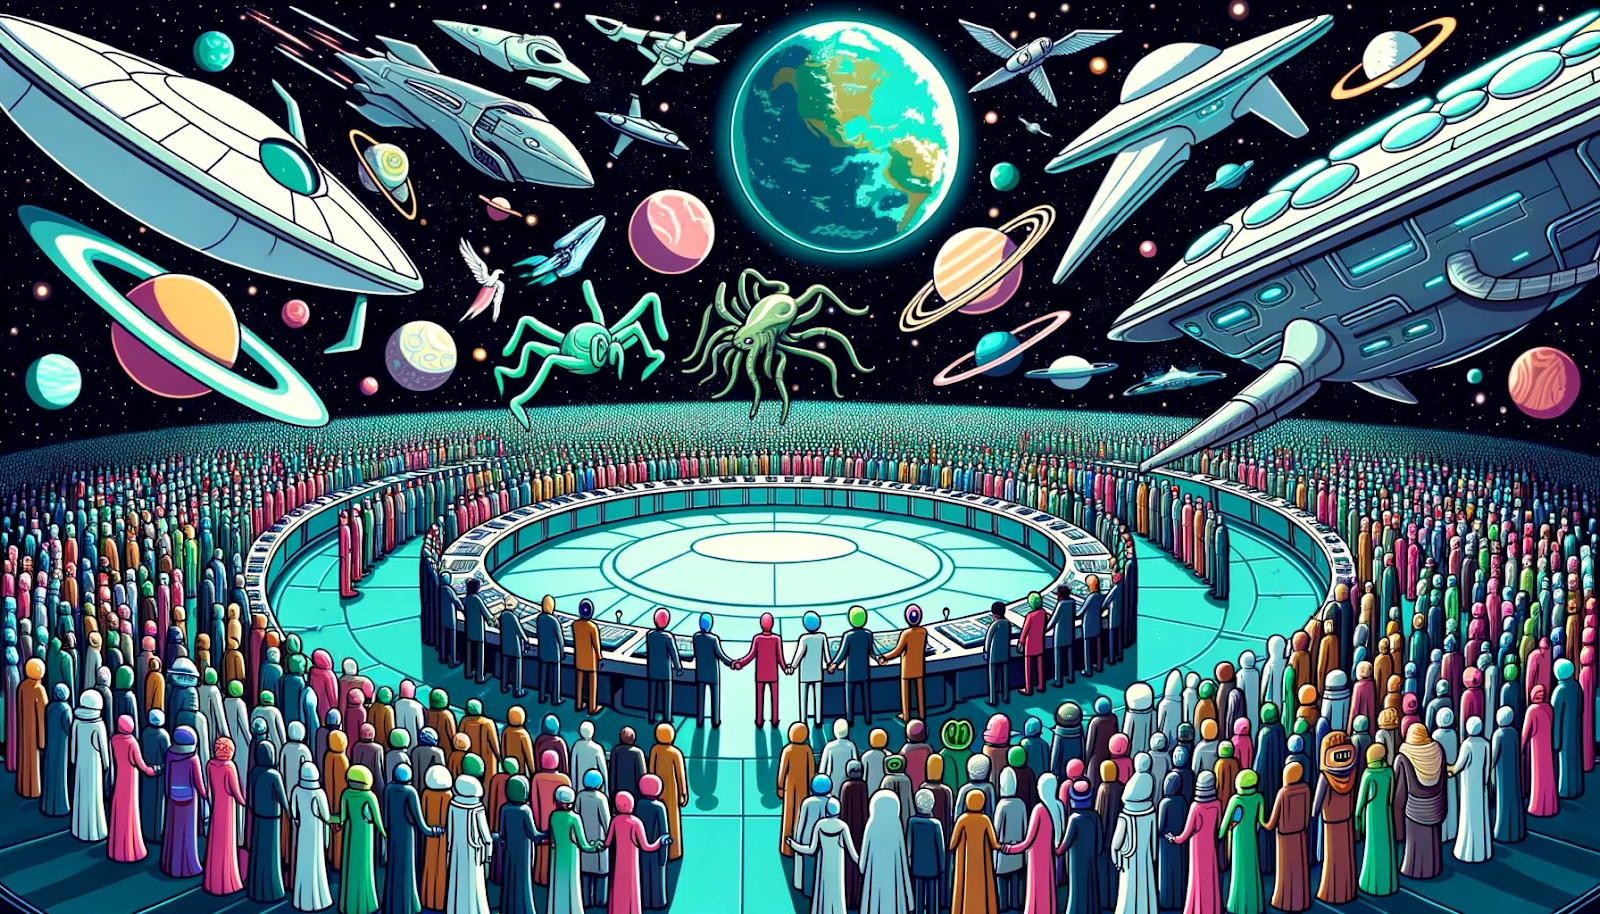 Prompt
Vector of a massive intergalactic council, with representatives of various alien civilizations, humans among them, shaking hands (or other appendages) in unity.